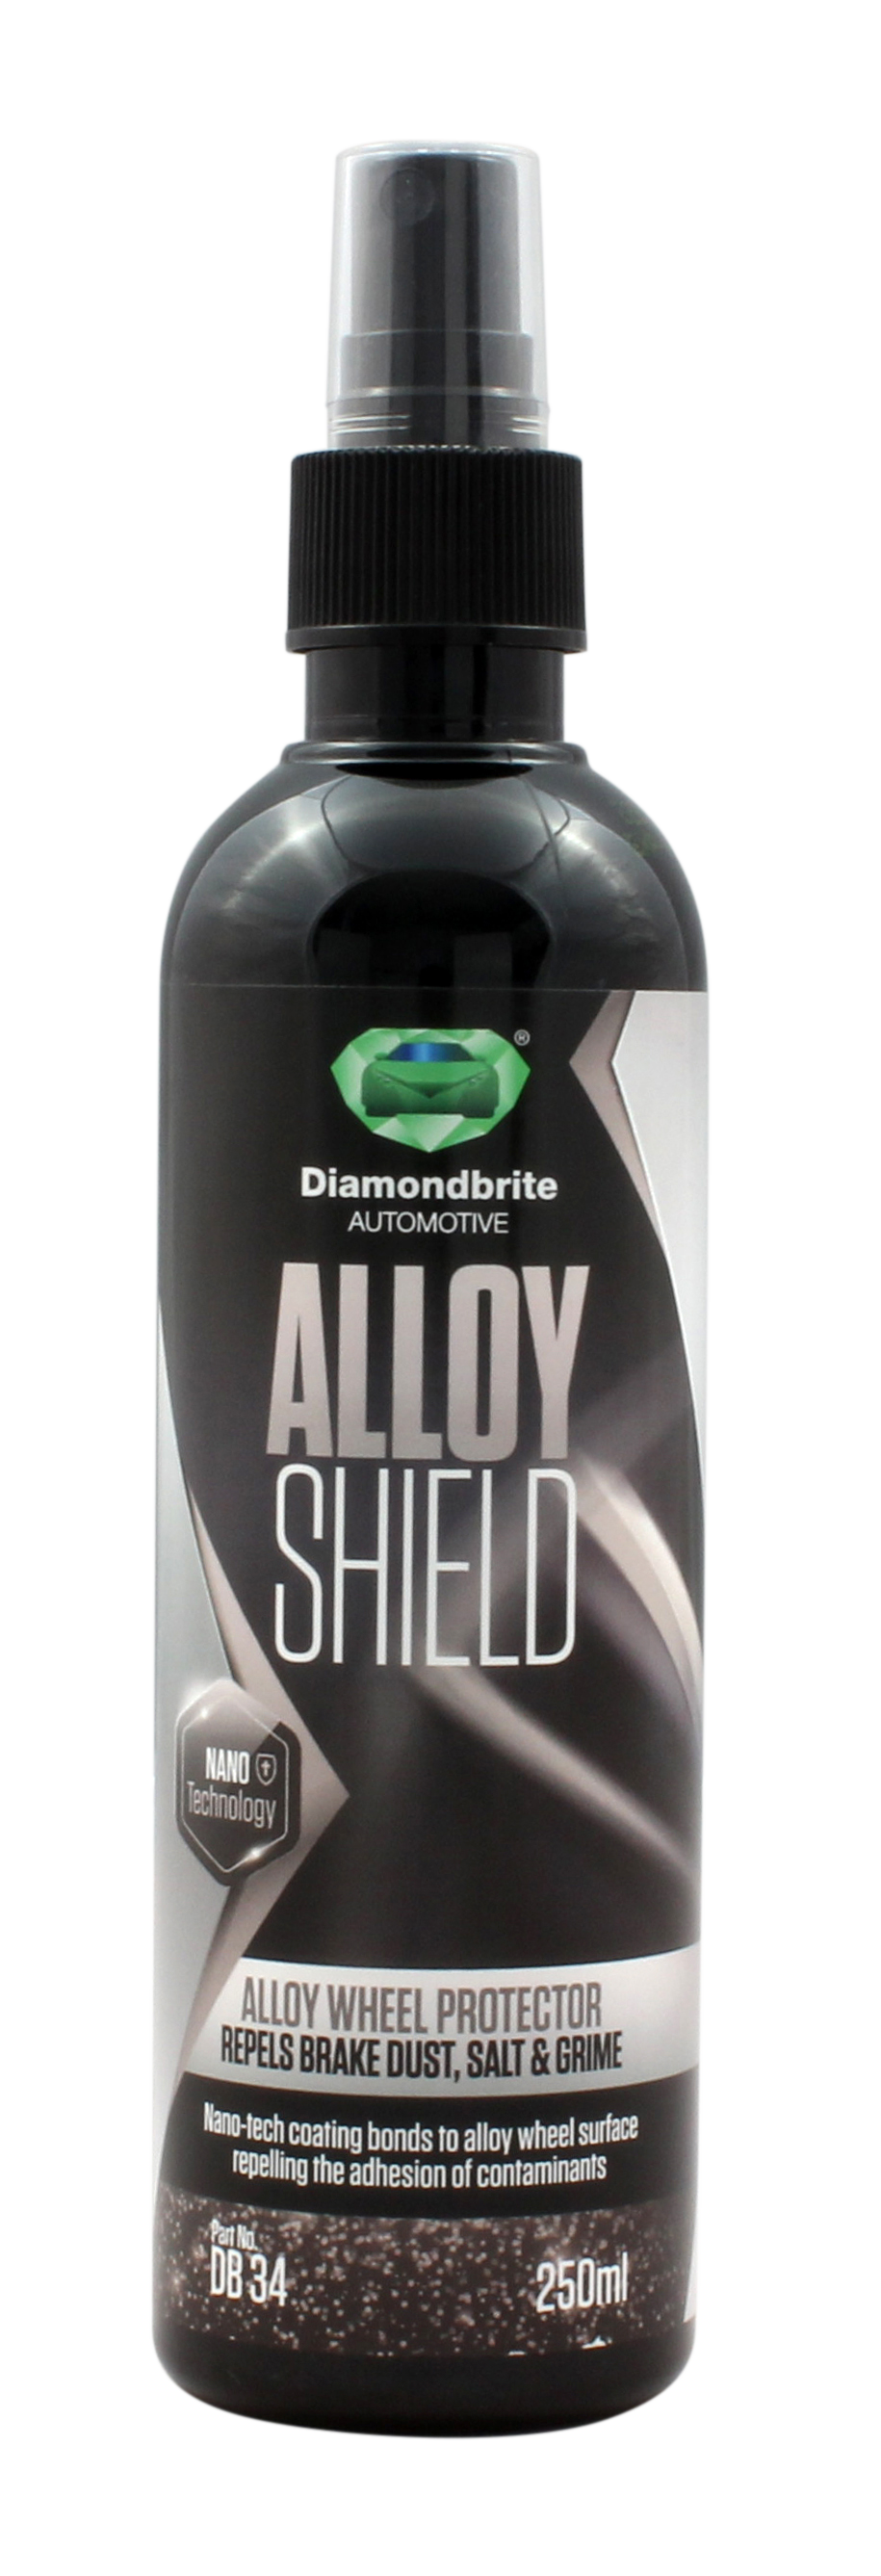 AIMEX AUTOMOTIVE ALLOY SHIELD WHEEL PROTECTOR CLEANER - NANO TECHNOLOGY - PROTECTIVE COATING - PREMIUM QUALITY CAR CARE - 250 ML - MADE IN UK